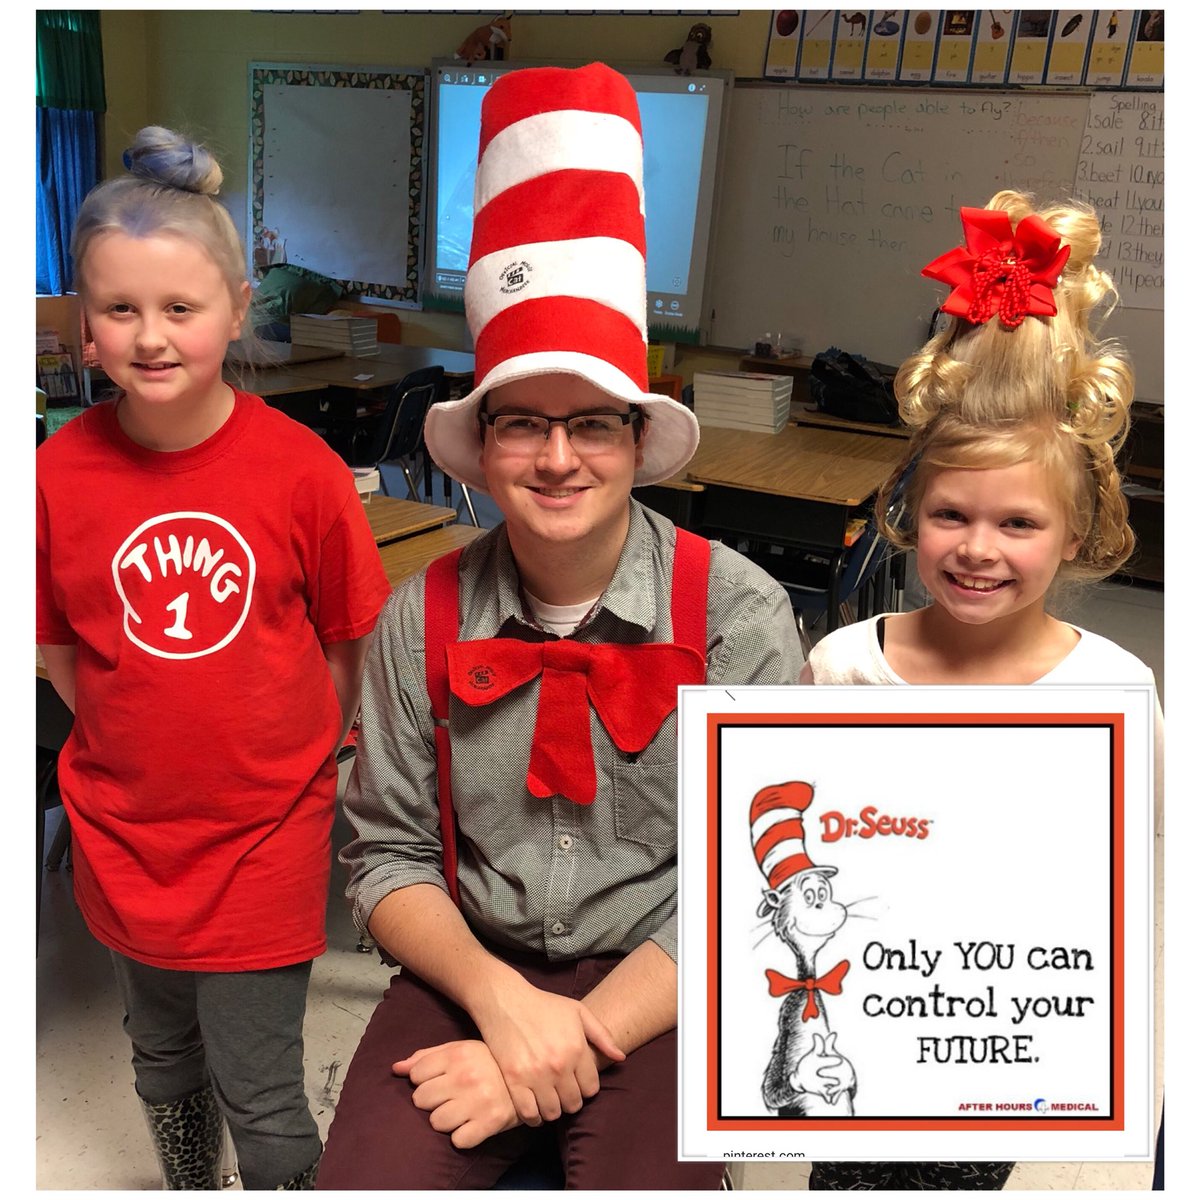 Great day @DadeElementary!
Only you can control your future.....Dr. Seuss.
❤️📚❤️📚❤️
#DrSeussDay 
#DrSeussWeek 
#ReadAcrossAmericaDay 
#proudschoolcounselor